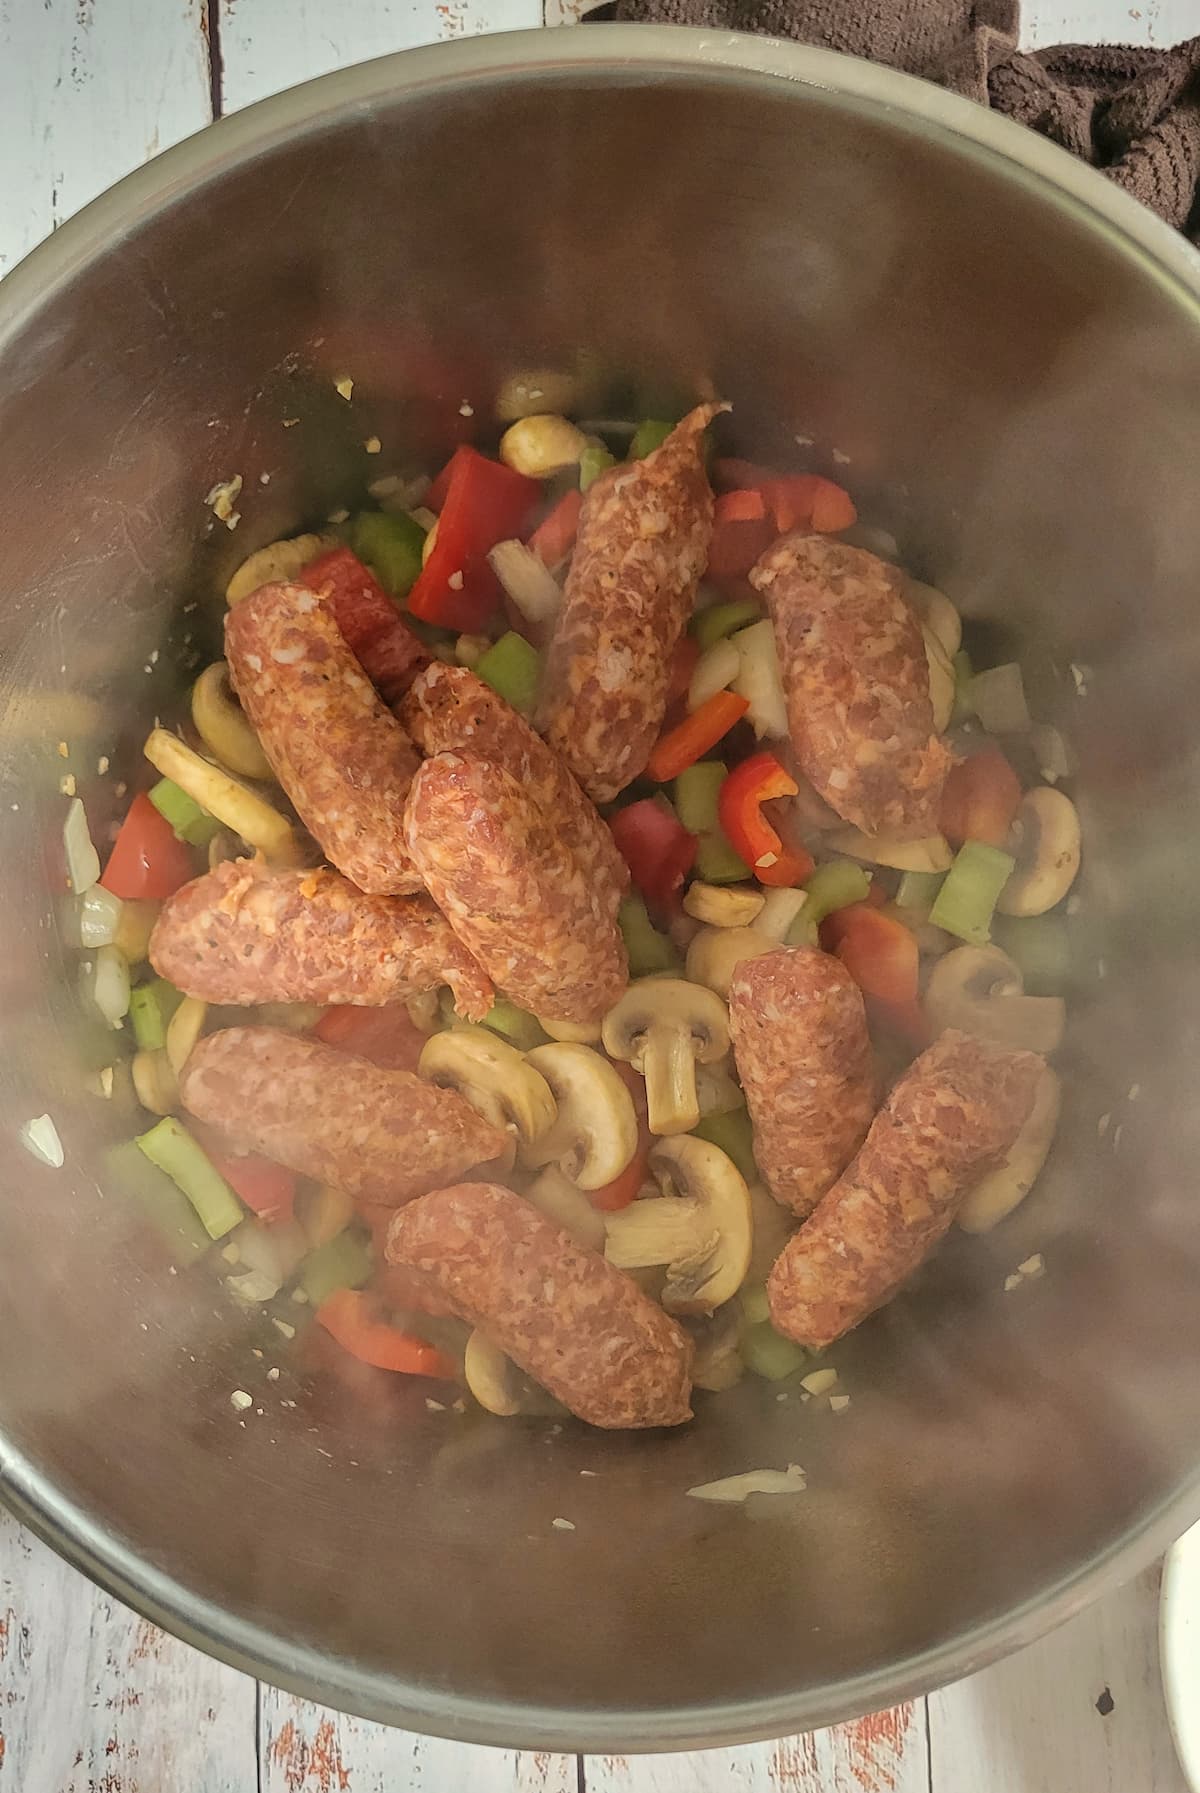 veggies and sausage cooking in a pot